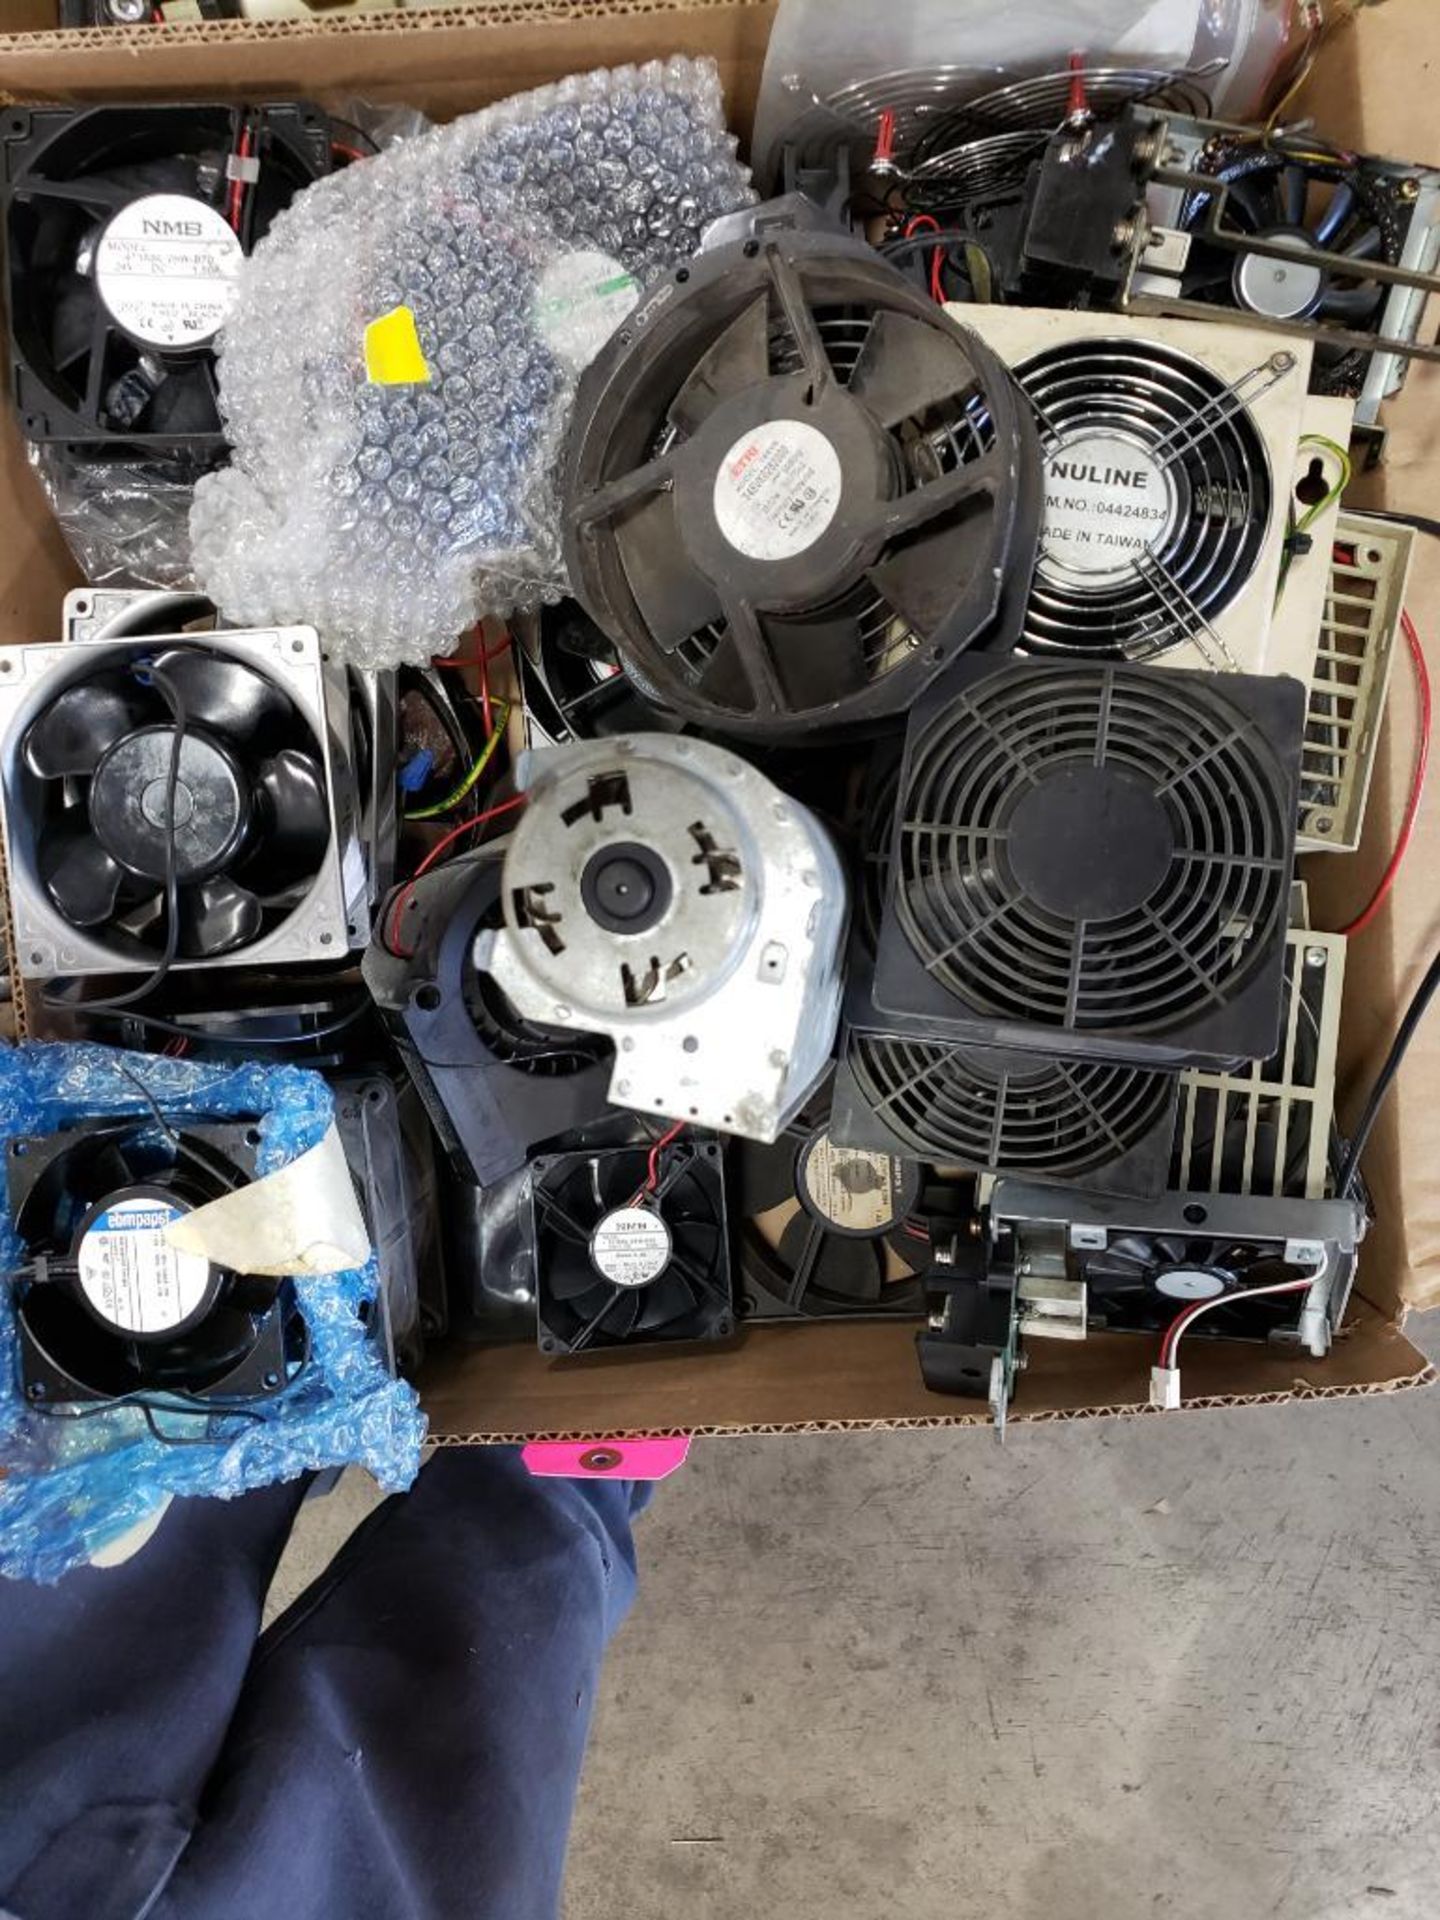 Assorted electrical fan assembly. Nuline, Papst, NMB.